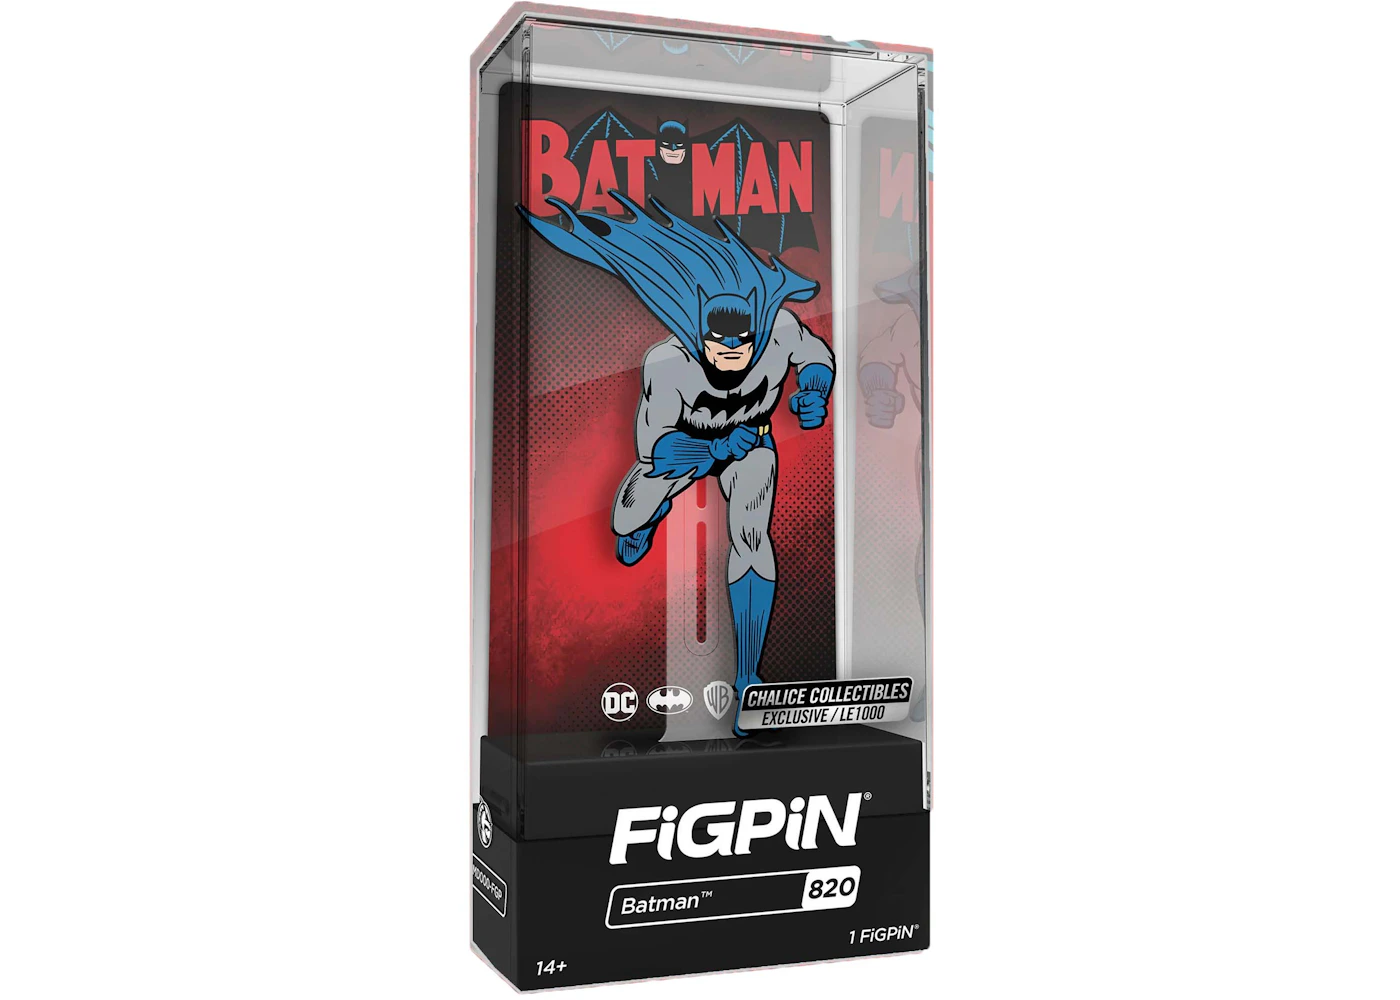 FiGPiN DC (Golden Age) Batman Chalice Collectibles Exclusive Pin #820 ...